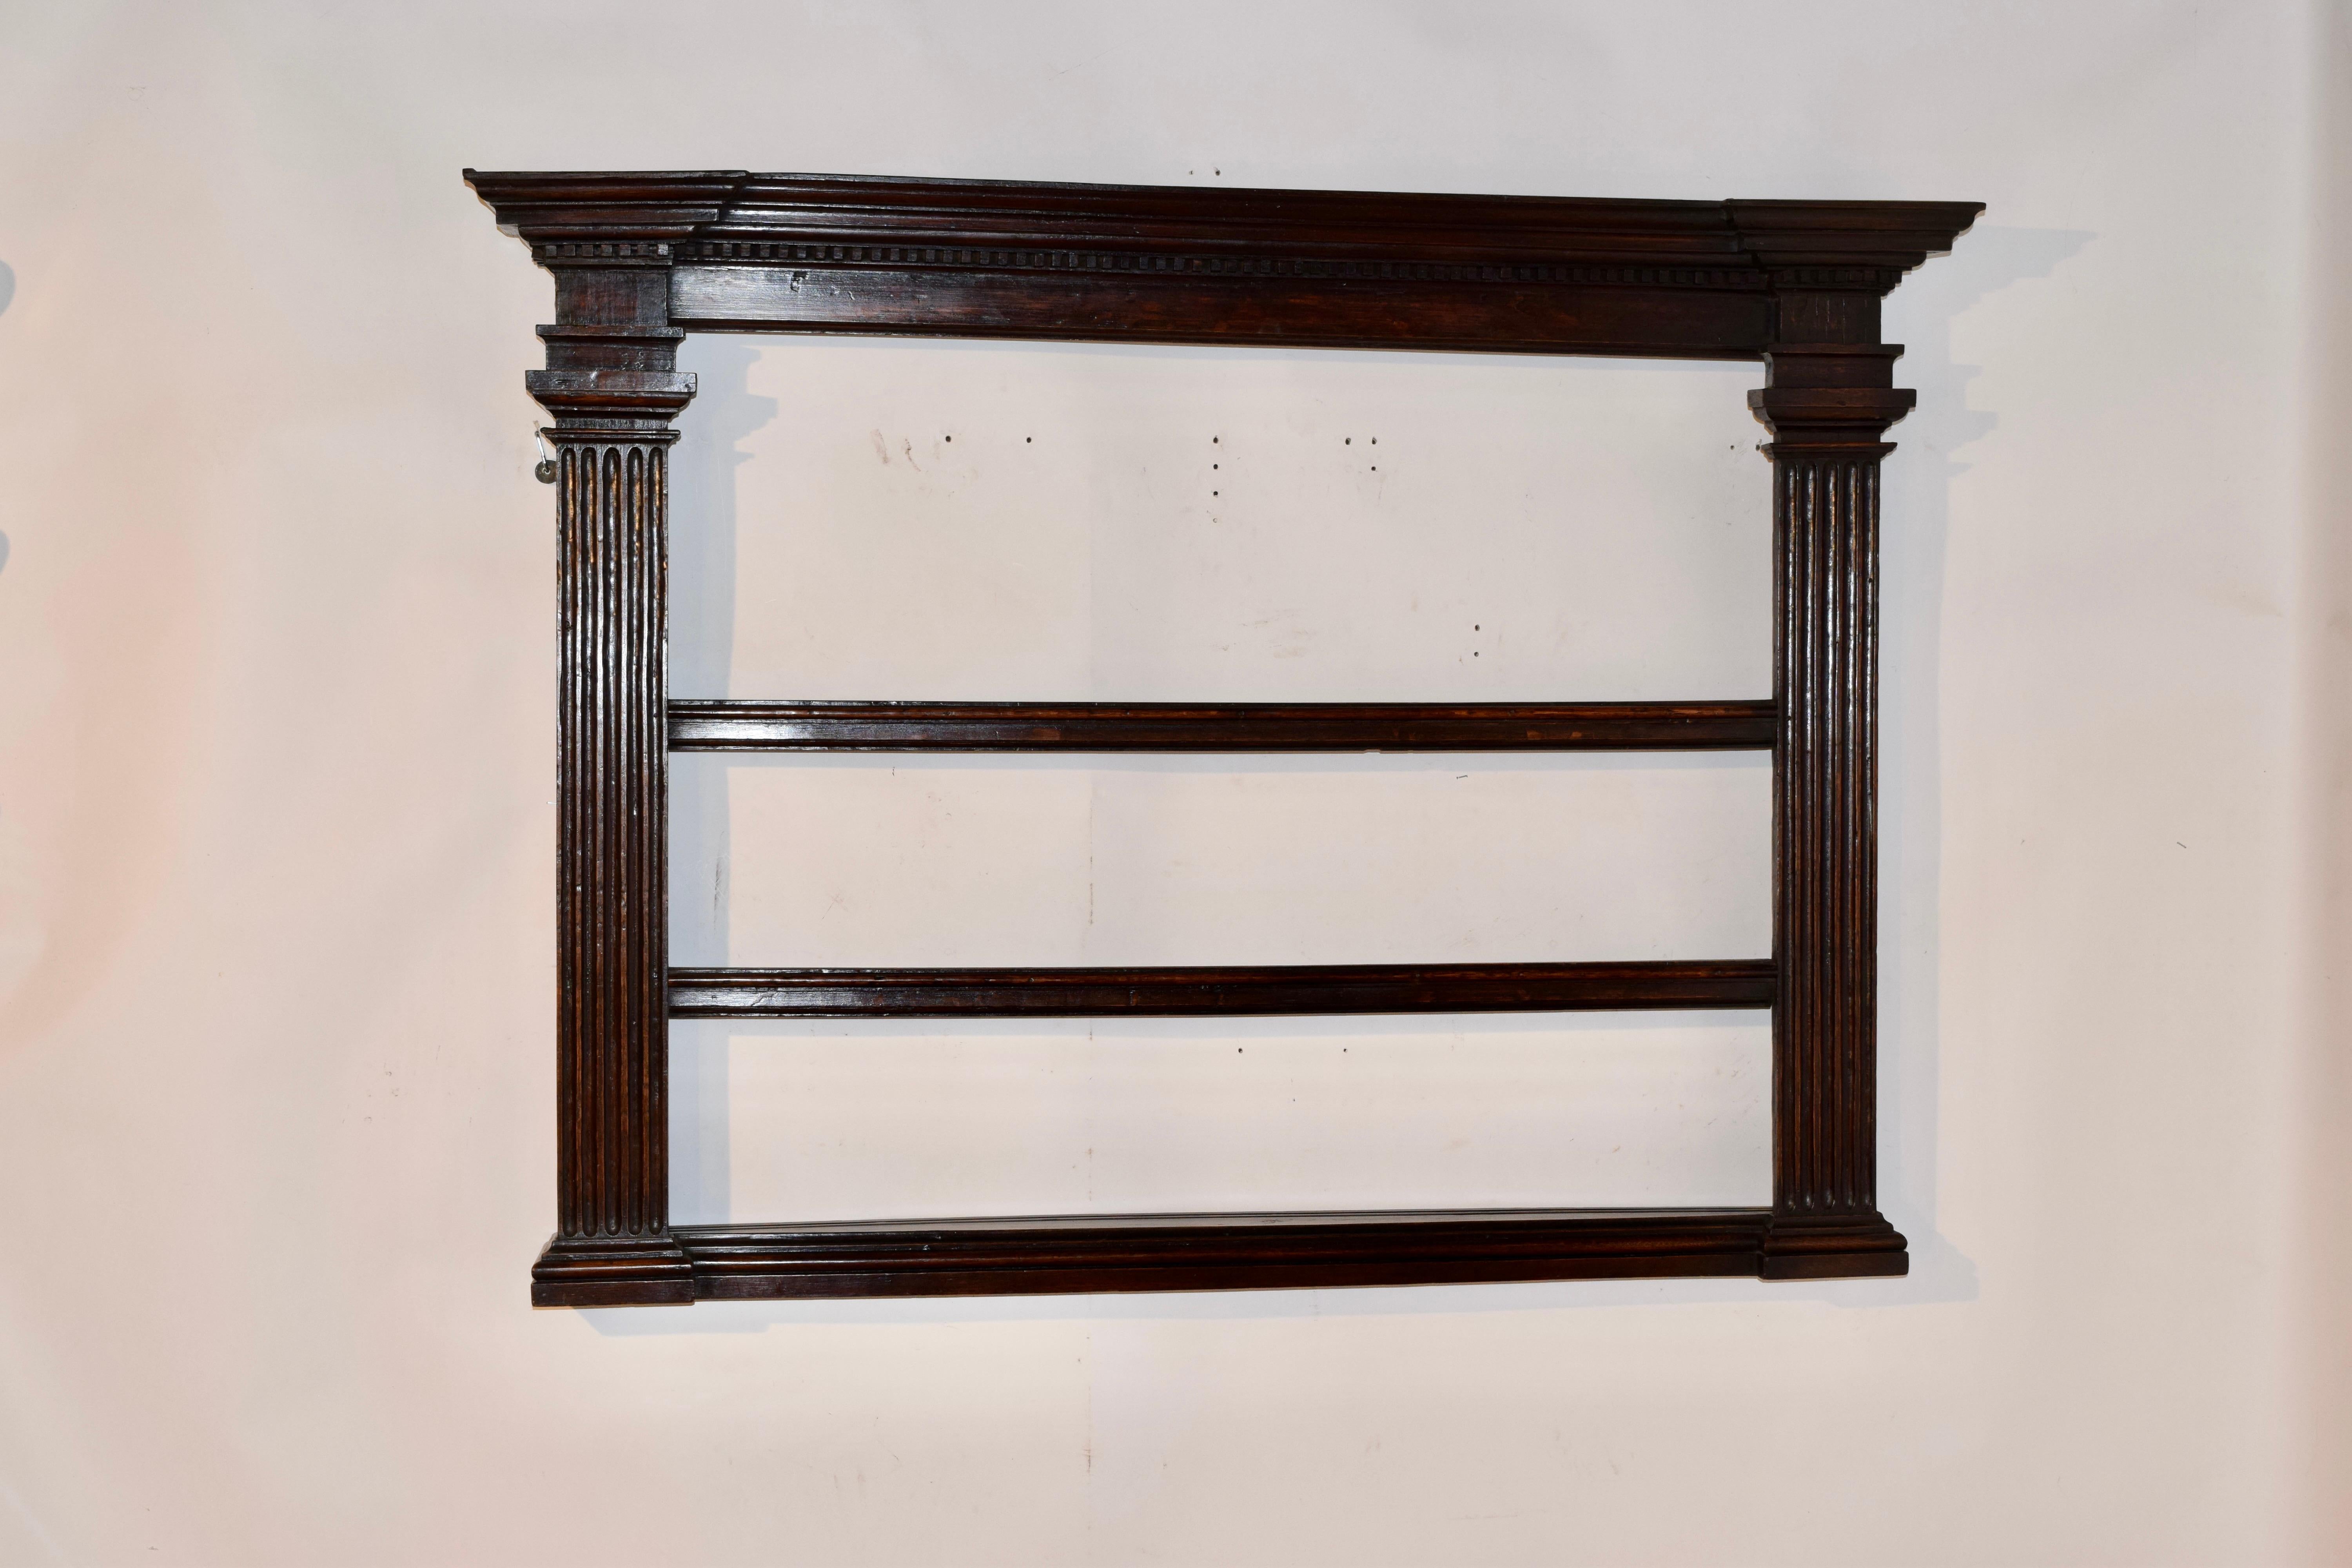 Late 18th century oak wall shelf from England. The top has an elegant crown with dentil molding, over  two columned side panels, joined by flat wall supports on the back and three shelves.  The top and the base are stepped out for added interest and